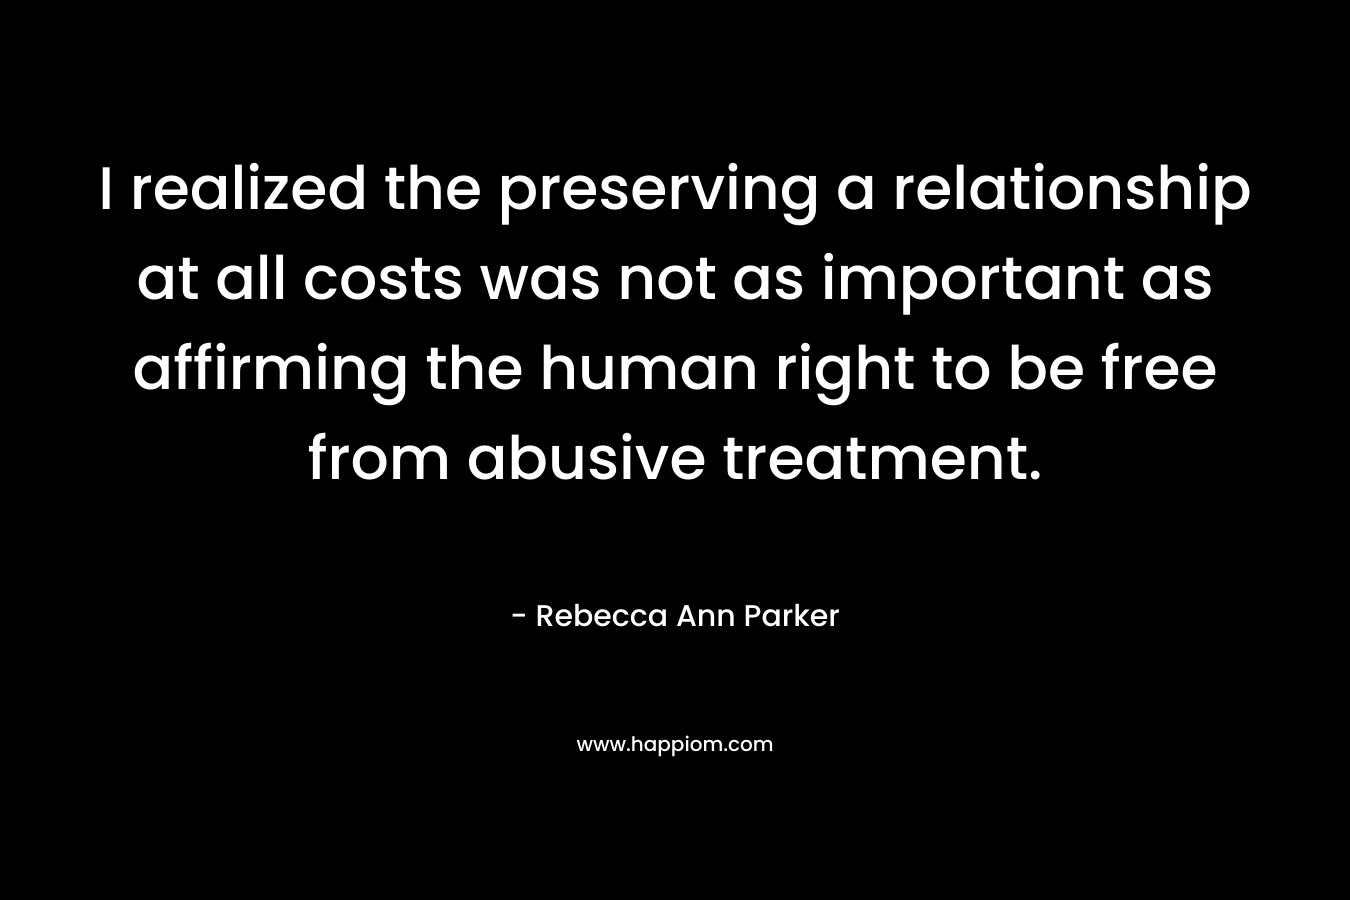 I realized the preserving a relationship at all costs was not as important as affirming the human right to be free from abusive treatment.